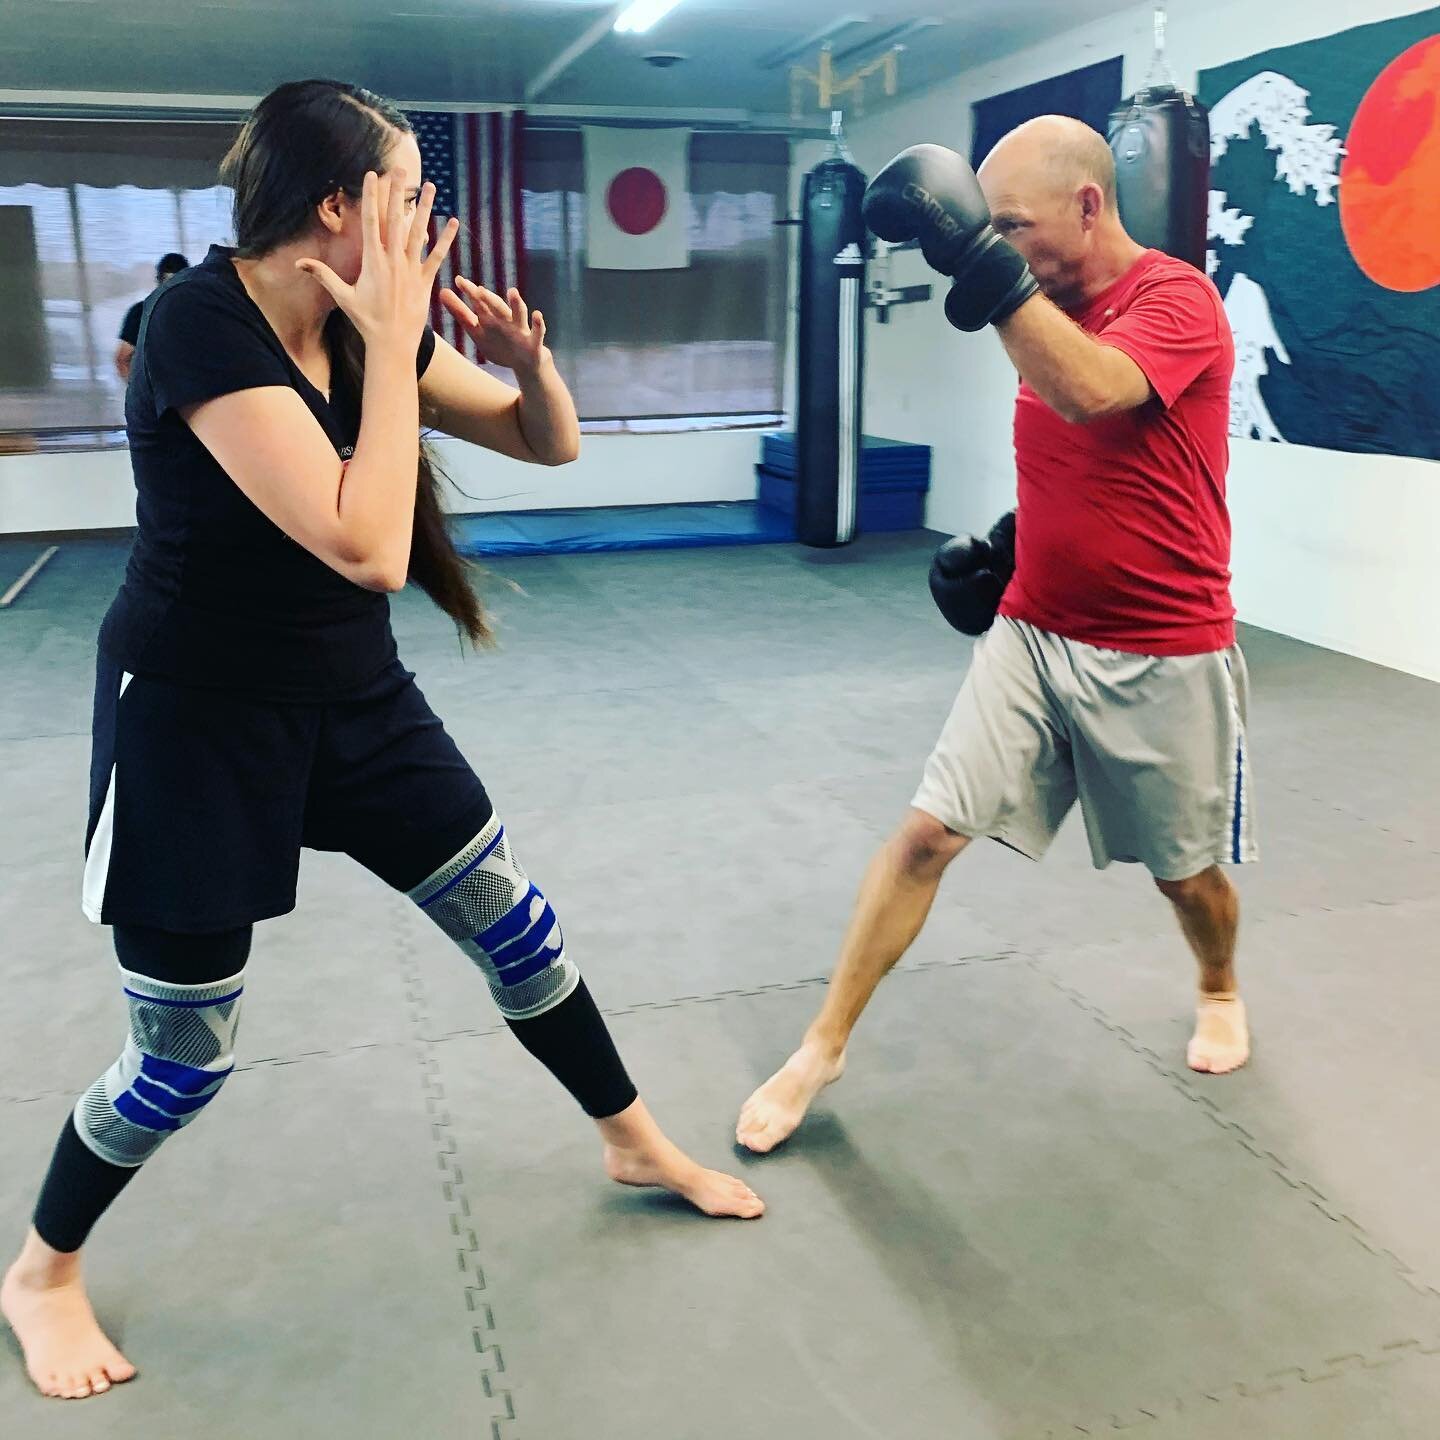 Always a fun evening when one of our past students visits from out of town! 👍 An evening of self-defense basics and sparring 🥊 

Interested in our classes? Send us a DM or contact us at steelcityselfdefense@gmail.com! 🥊 

#steelcityselfdefense #pu